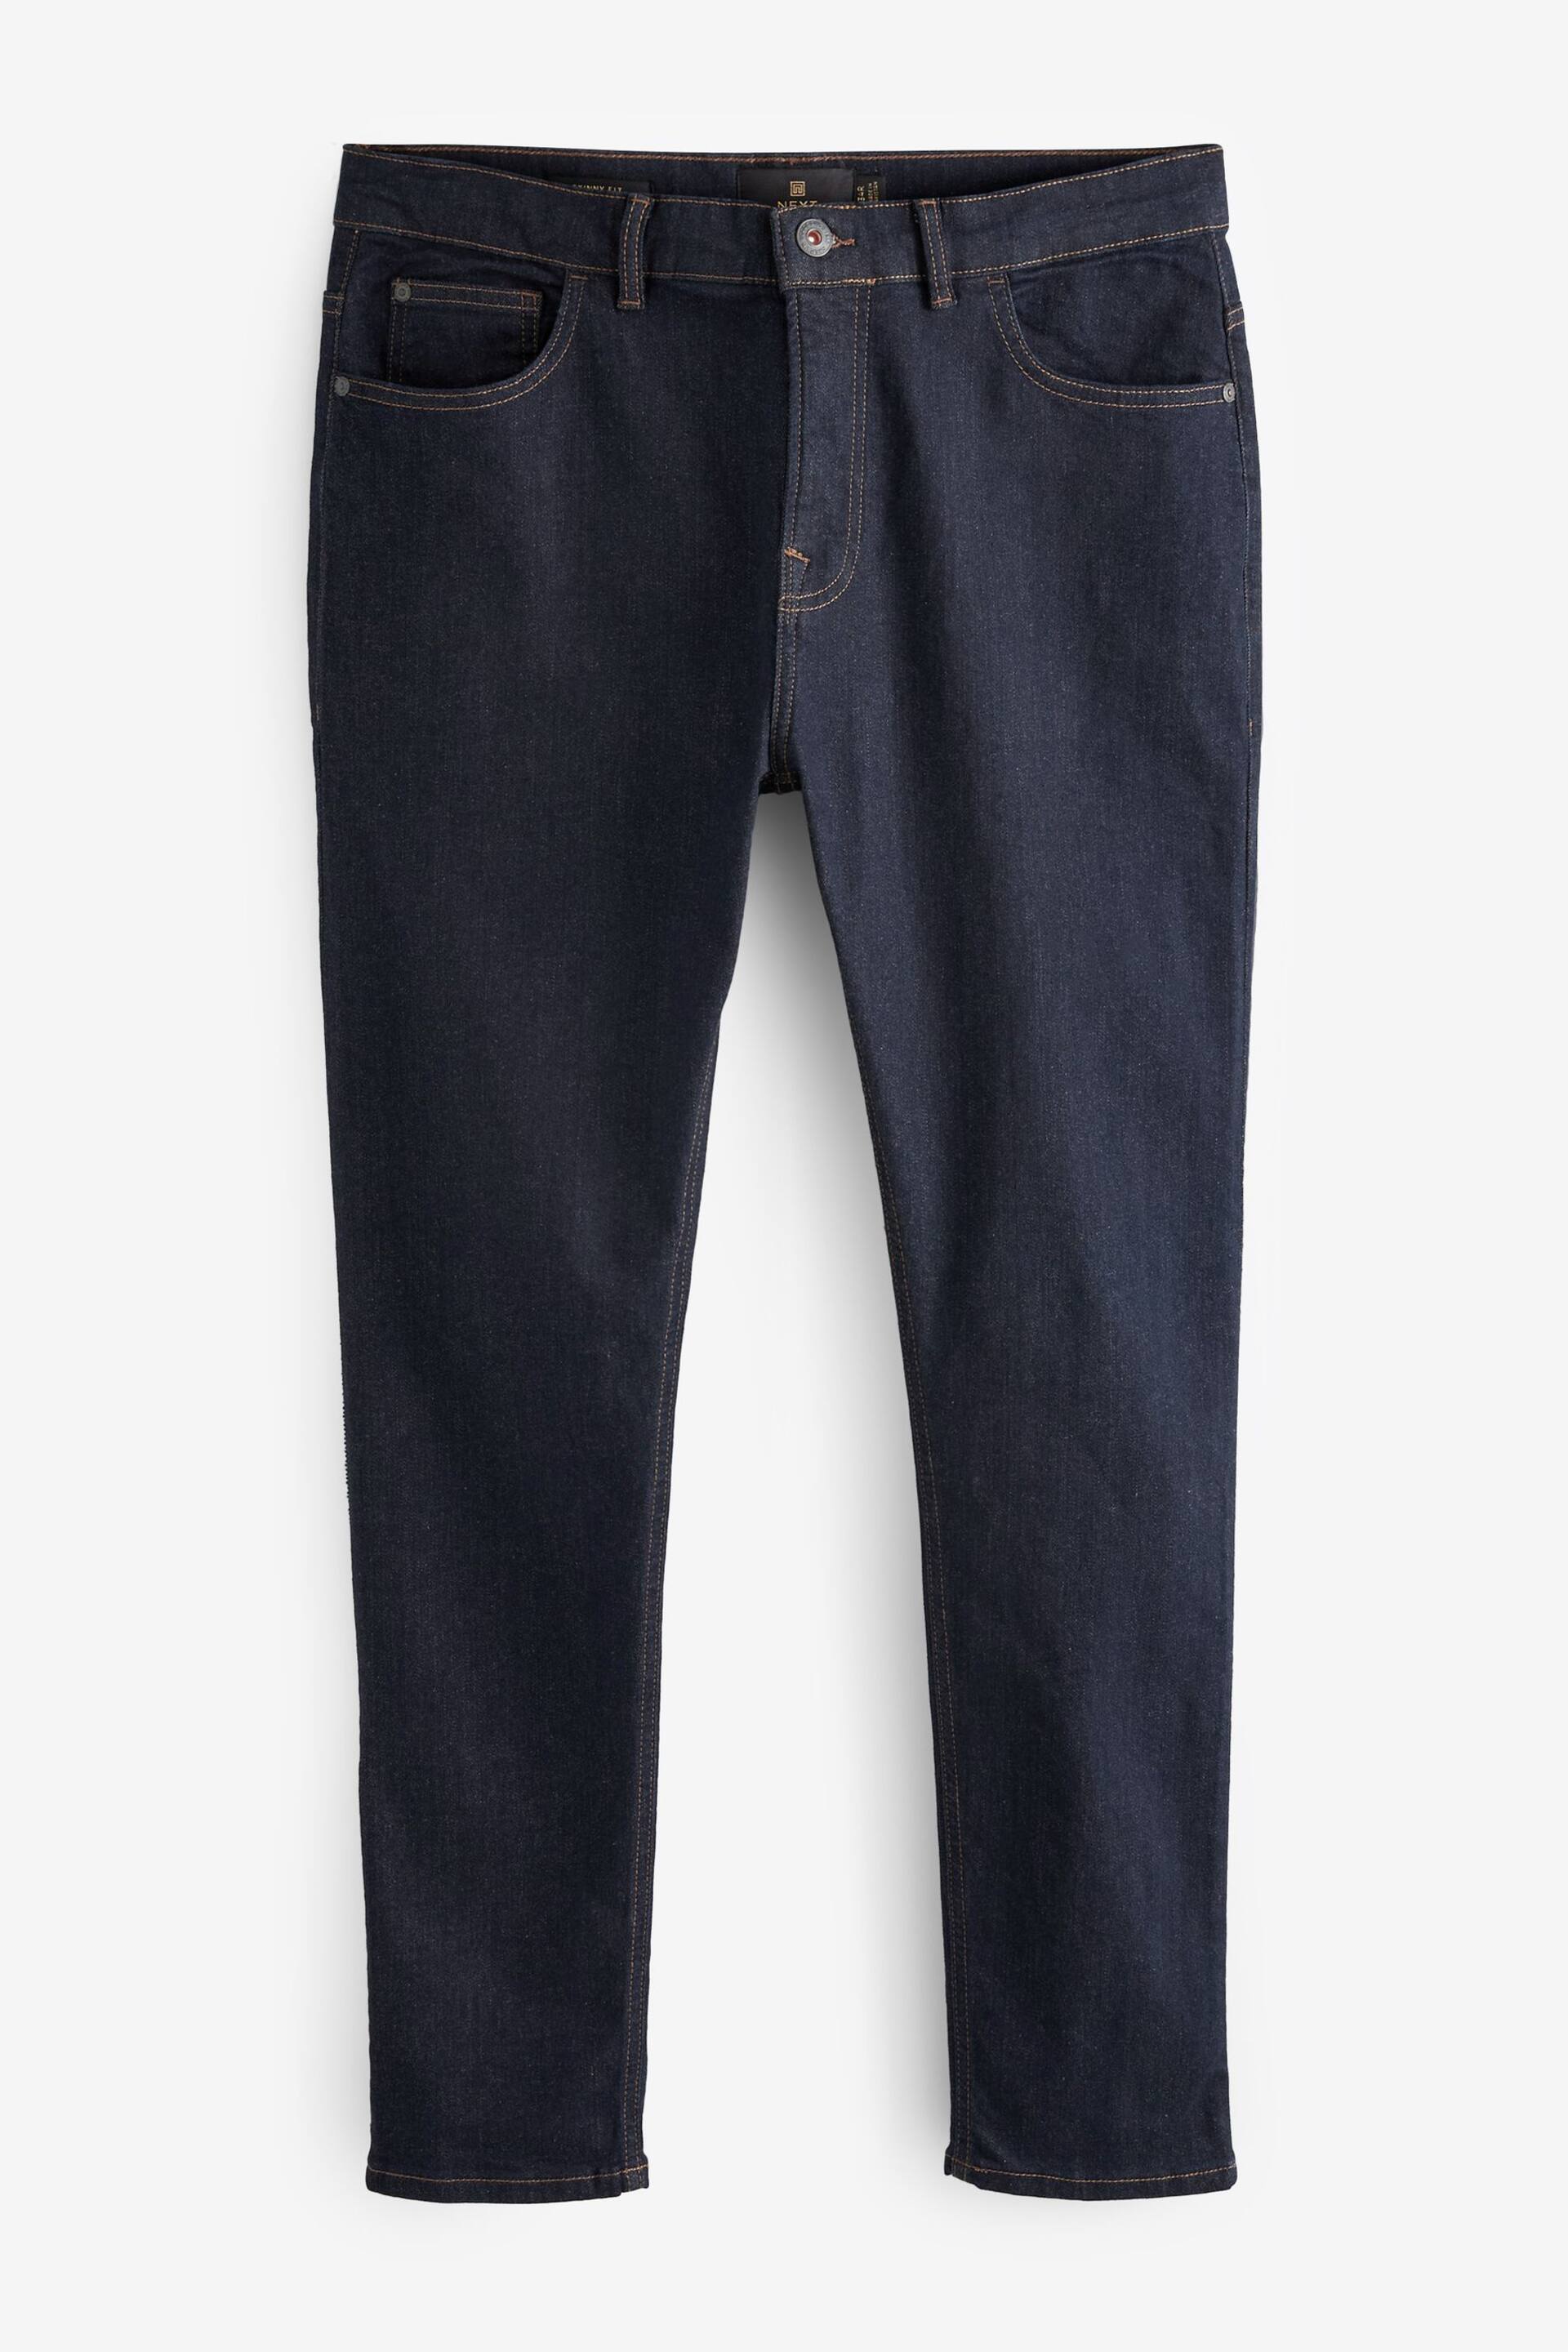 Blue Indigo Rinse Skinny Fit Classic Stretch Jeans - Image 6 of 9